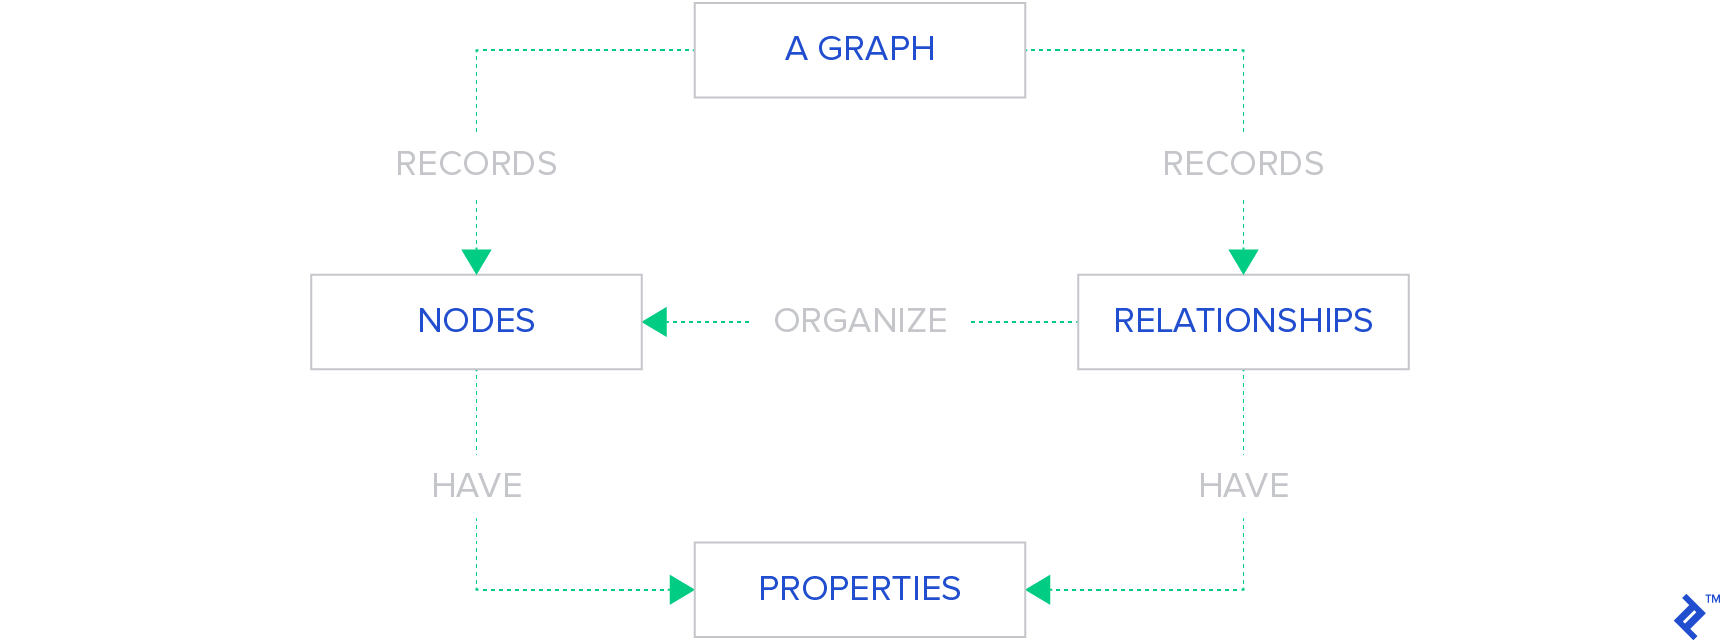 A graph about graphs. At top center is a box called "a graph" with two arrows coming out of it. Both arrows are called "records"; one points to a "nodes" box and the other to a "relationships" box.  The "relationships" box has an "organize" arrow pointing to the "nodes" box. Both "nodes" and "relationships" have arrows called "have" pointing to one final box, "properties". In other words, a graph records relationships and nodes, which both have properties, and relationships organize nodes.